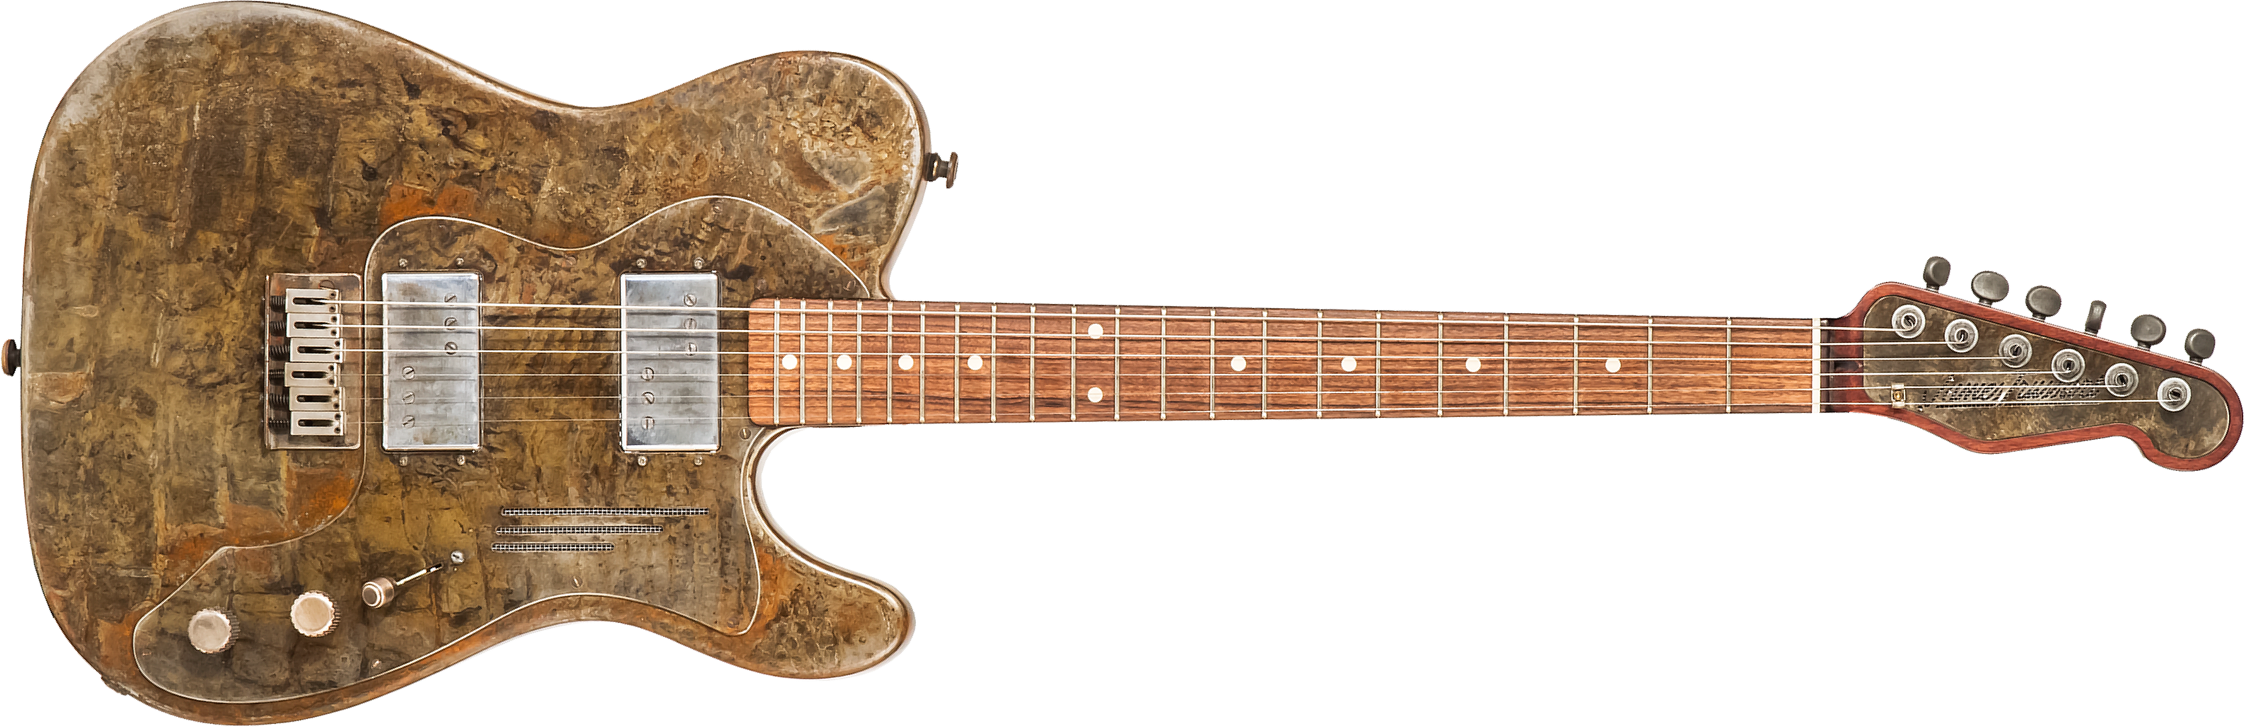 James Trussart Deluxe Steelguard Caster Perf. Back Wide Range 2h Rw Rusty #17148 - Rust O Matic - Guitare Électrique 1/2 Caisse - Main picture